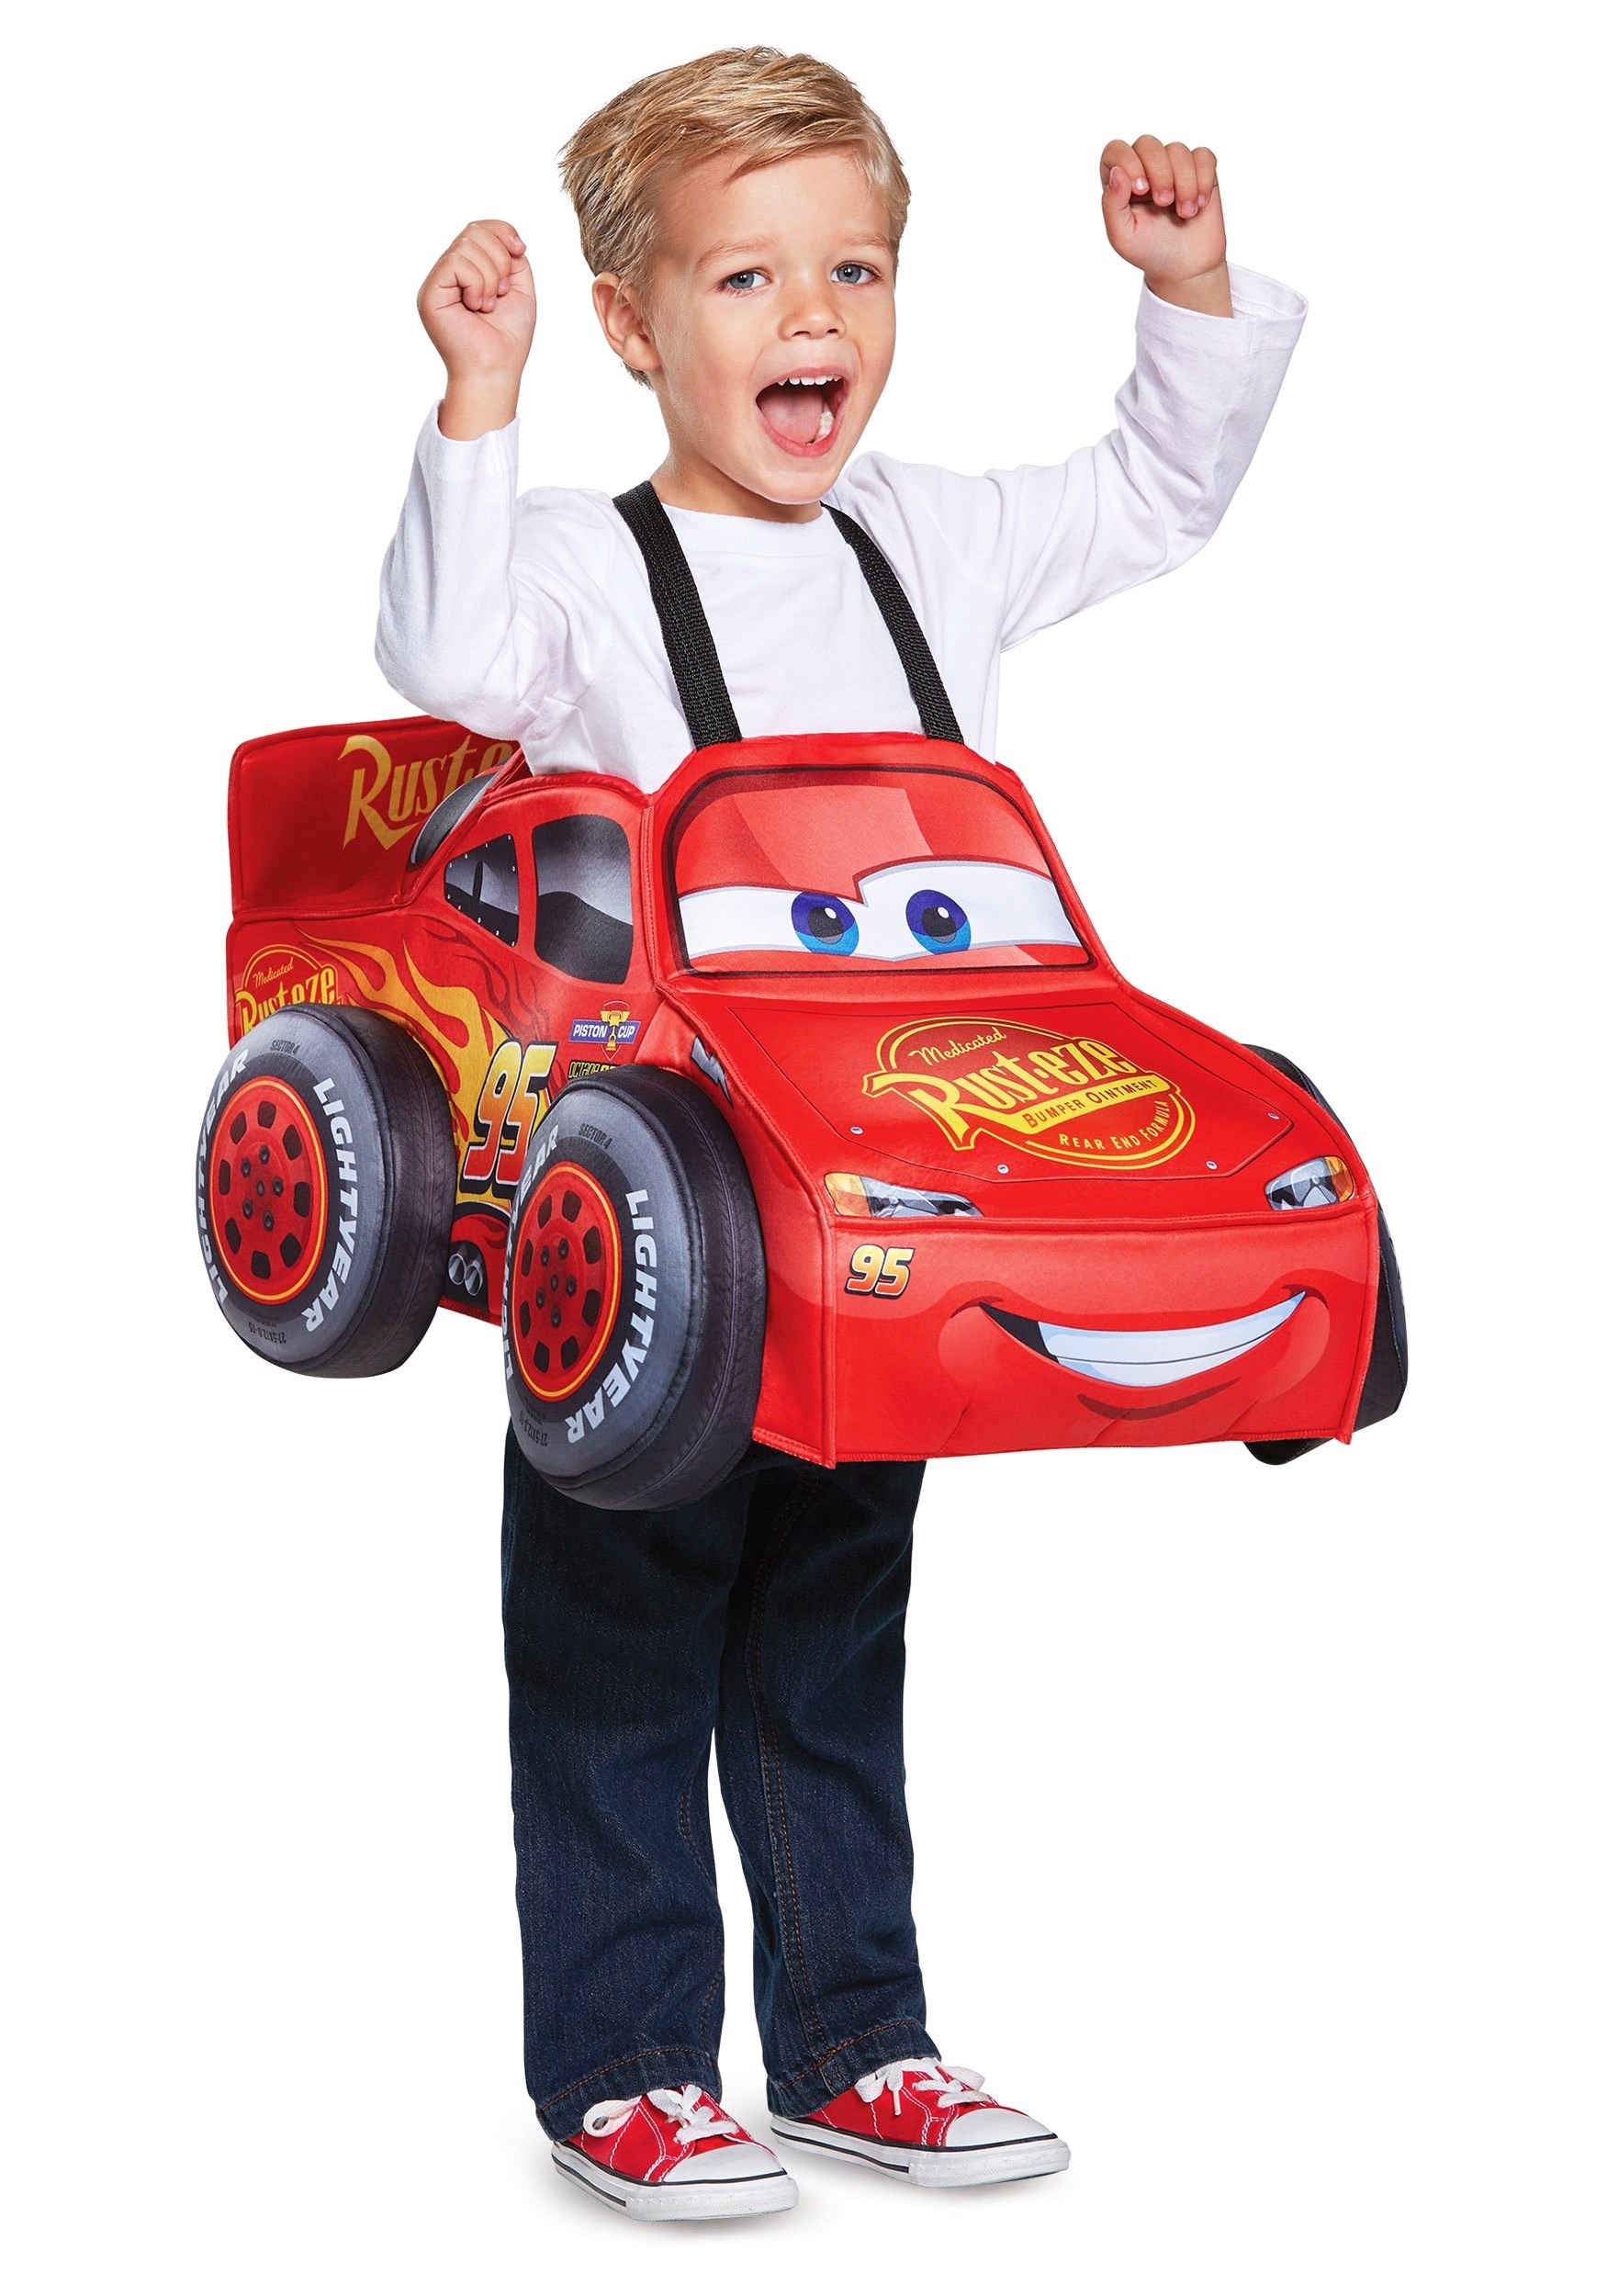 https://images.halloweencostumes.com/products/41899/1-1/cars-lightning-mcqueen-3d-toddler-costume-main-upd.jpg